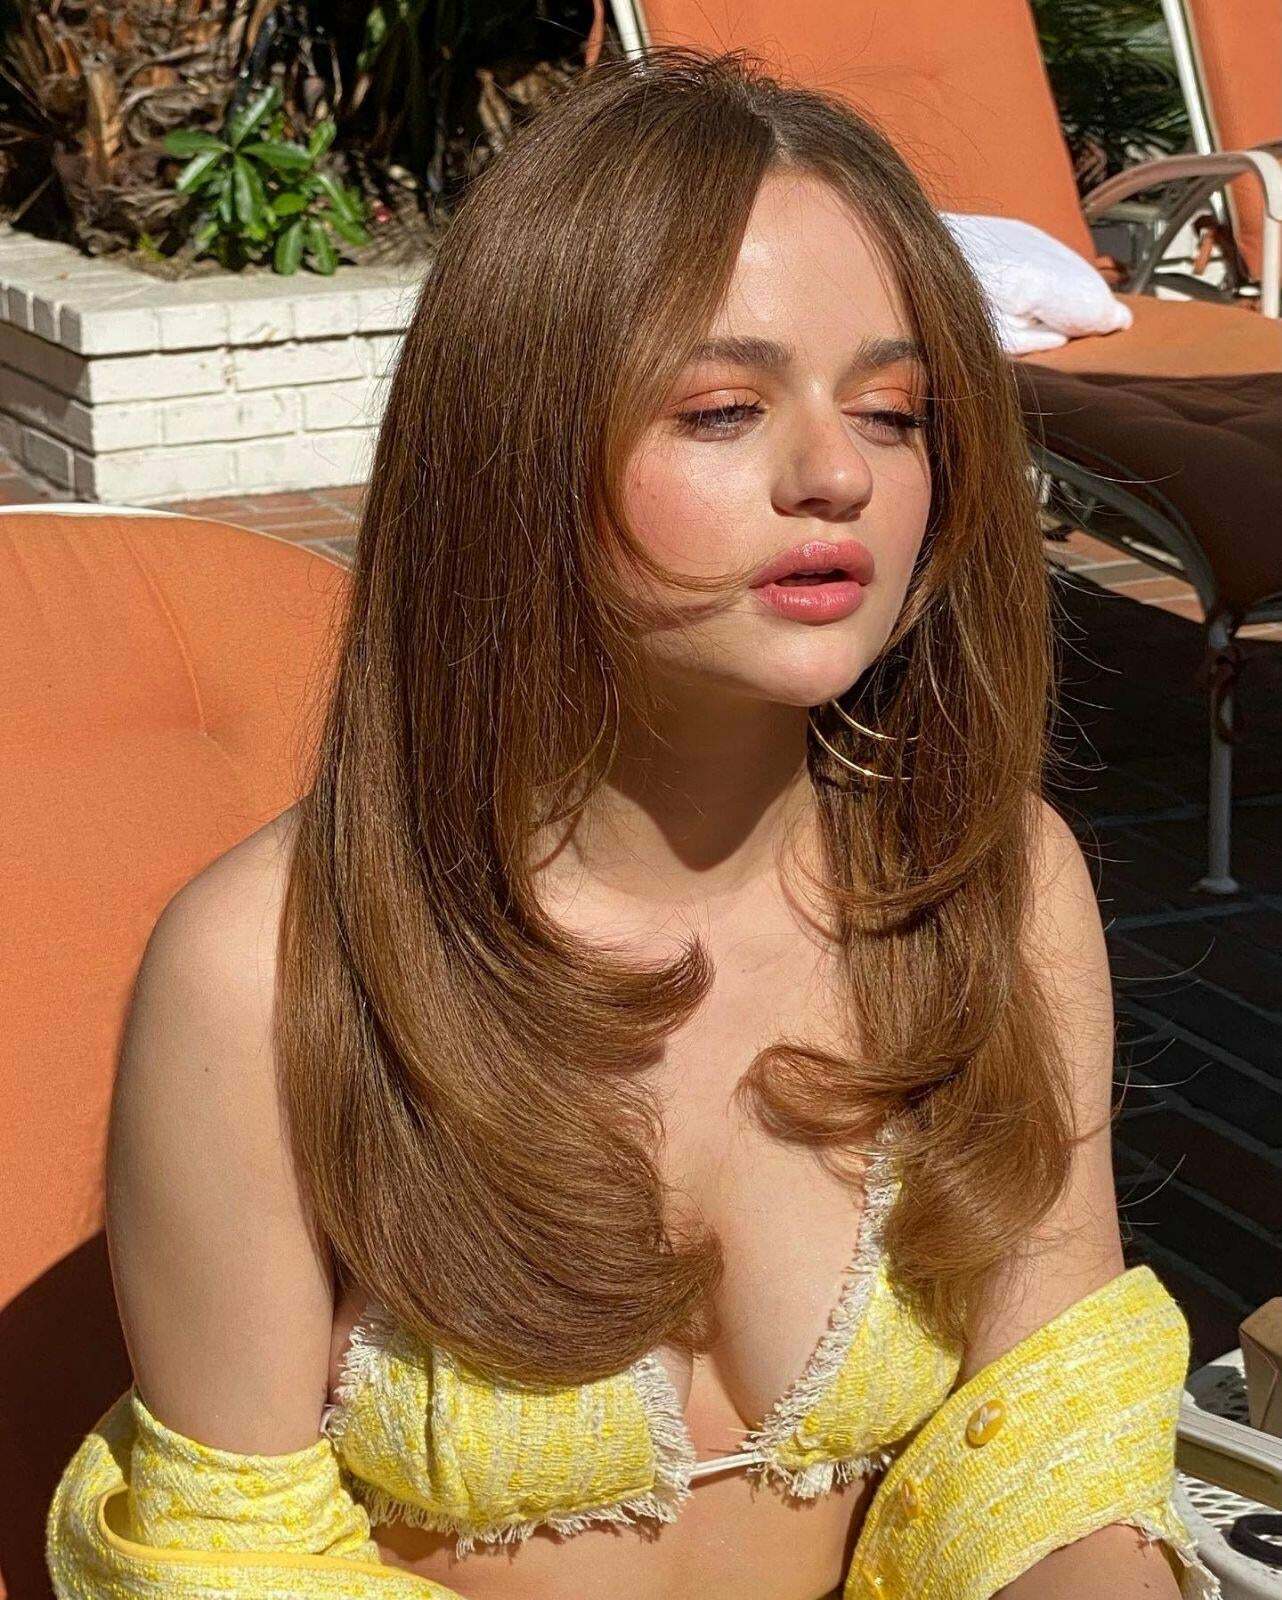 Joey King is so underrated